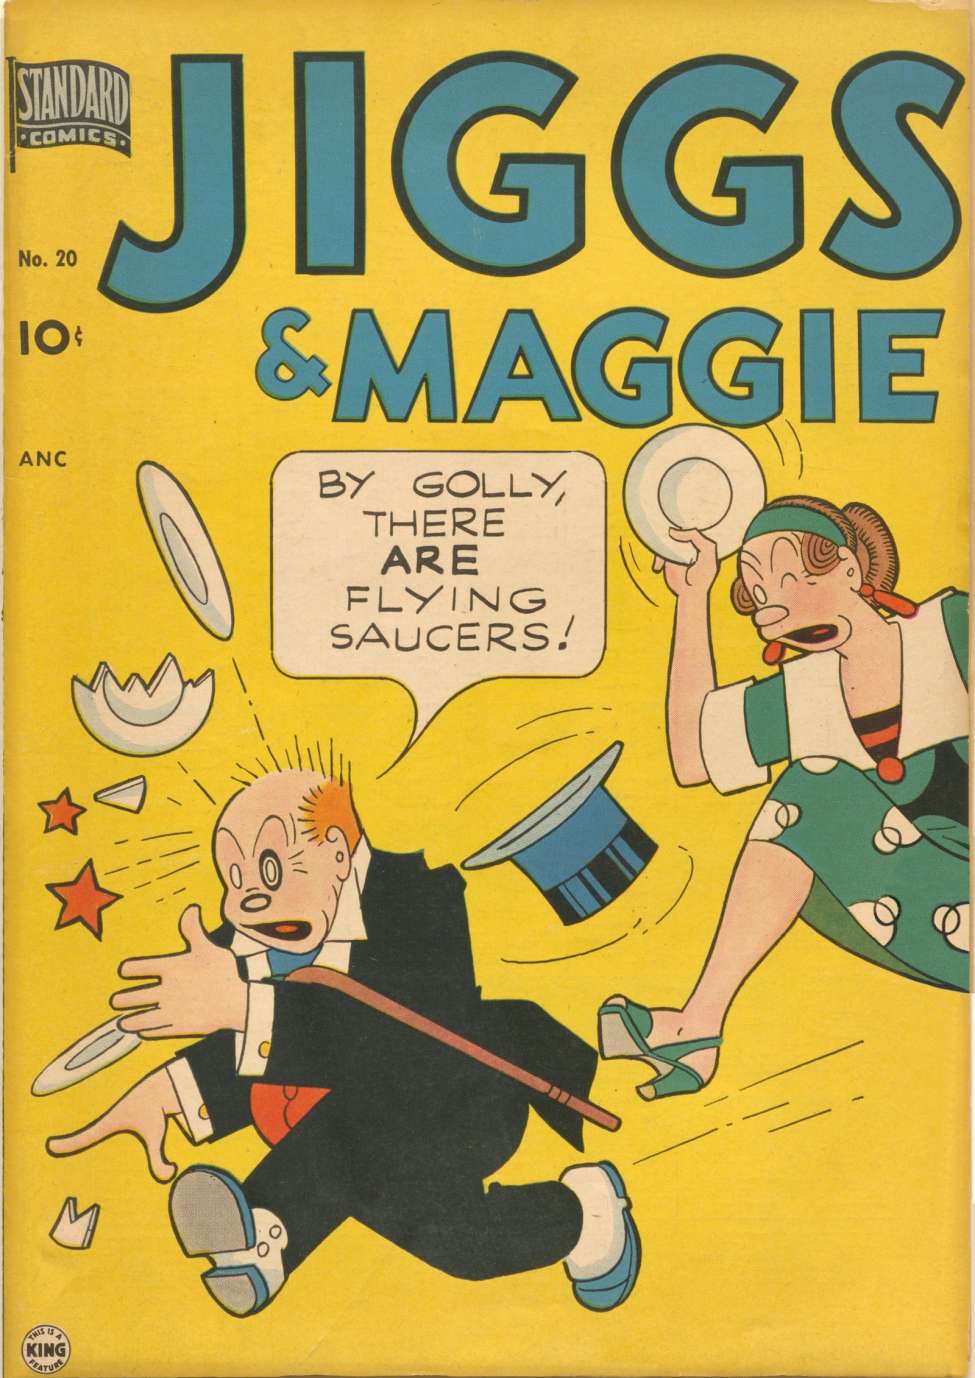 Book Cover For Jiggs & Maggie 20